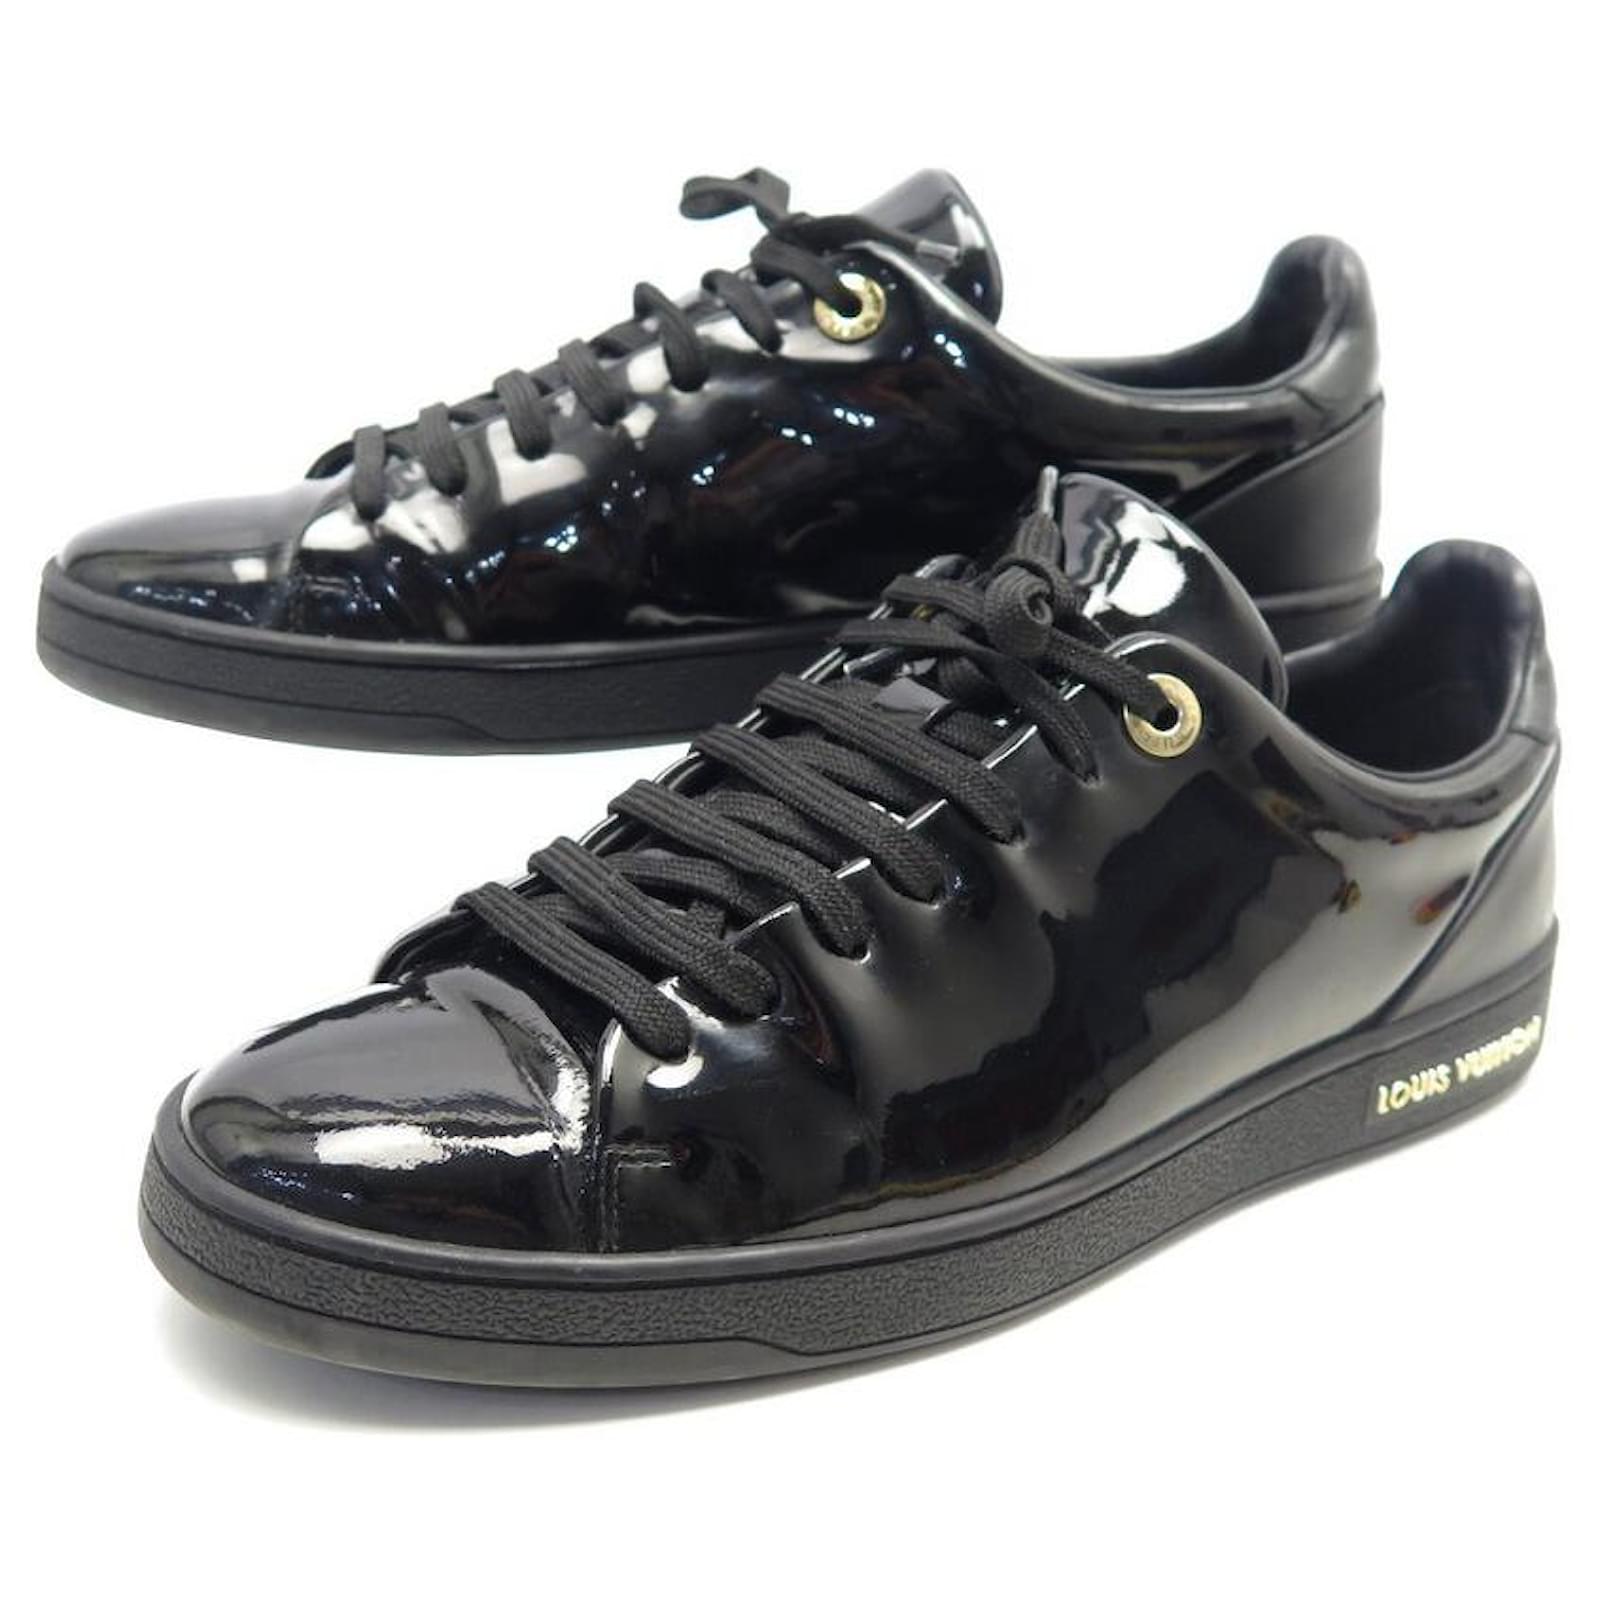 NEW LOUIS VUITTON FRONTROW SHOES 37.5 PATENT LEATHER SNEAKERS